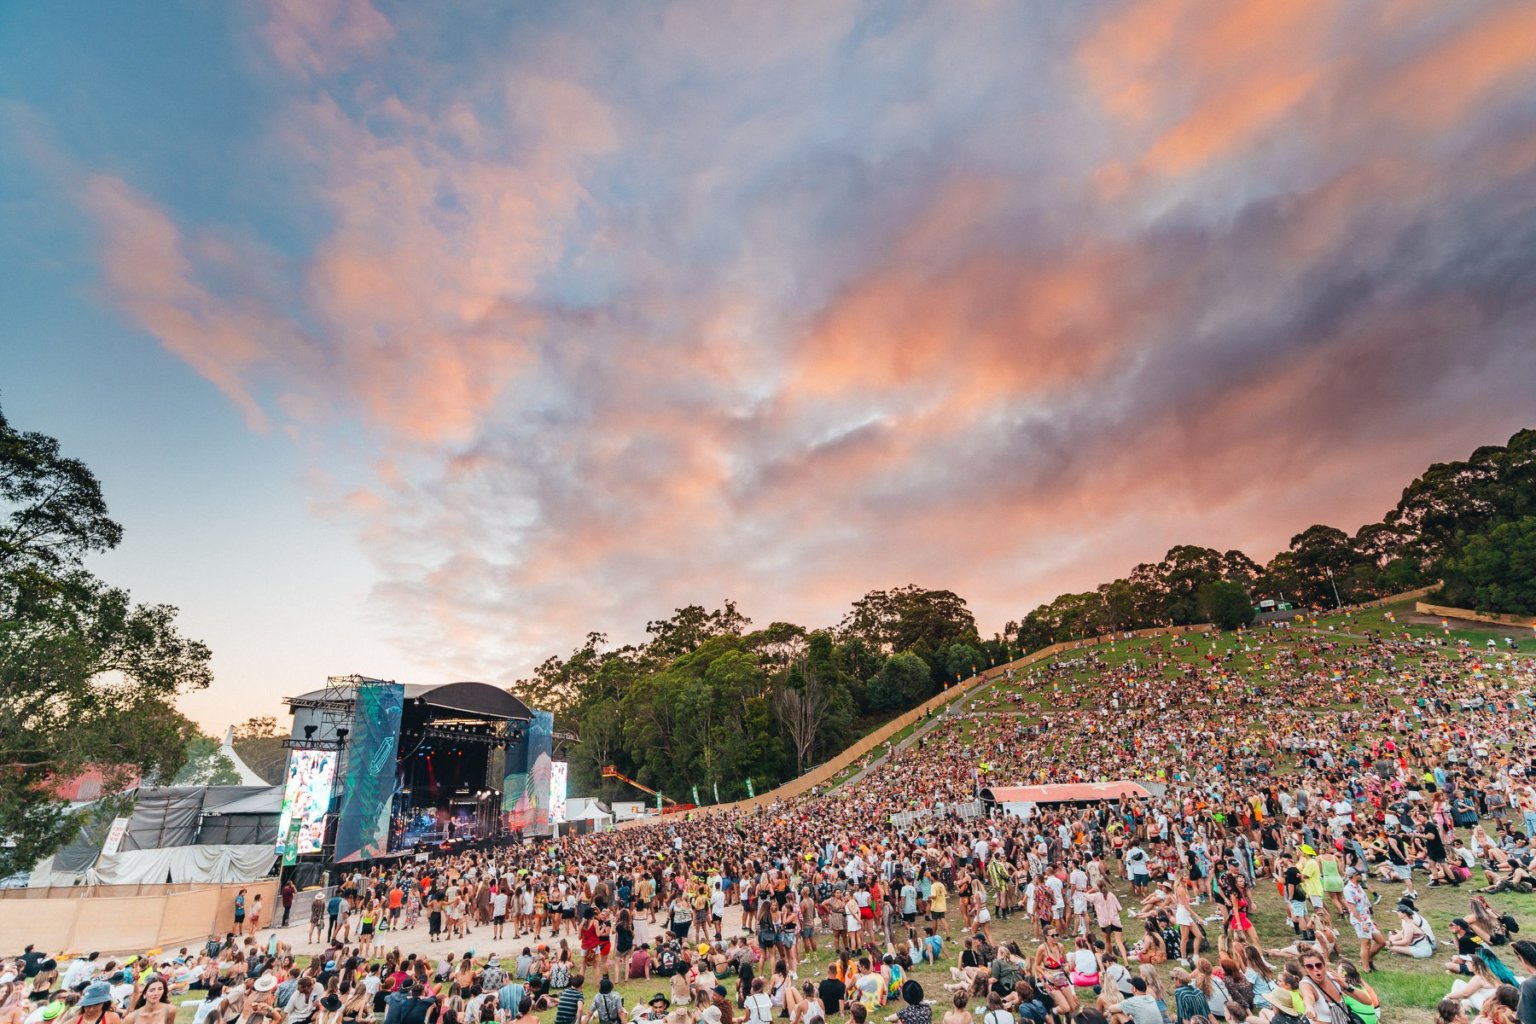 14 Best Festivals in January Around the World in 2024